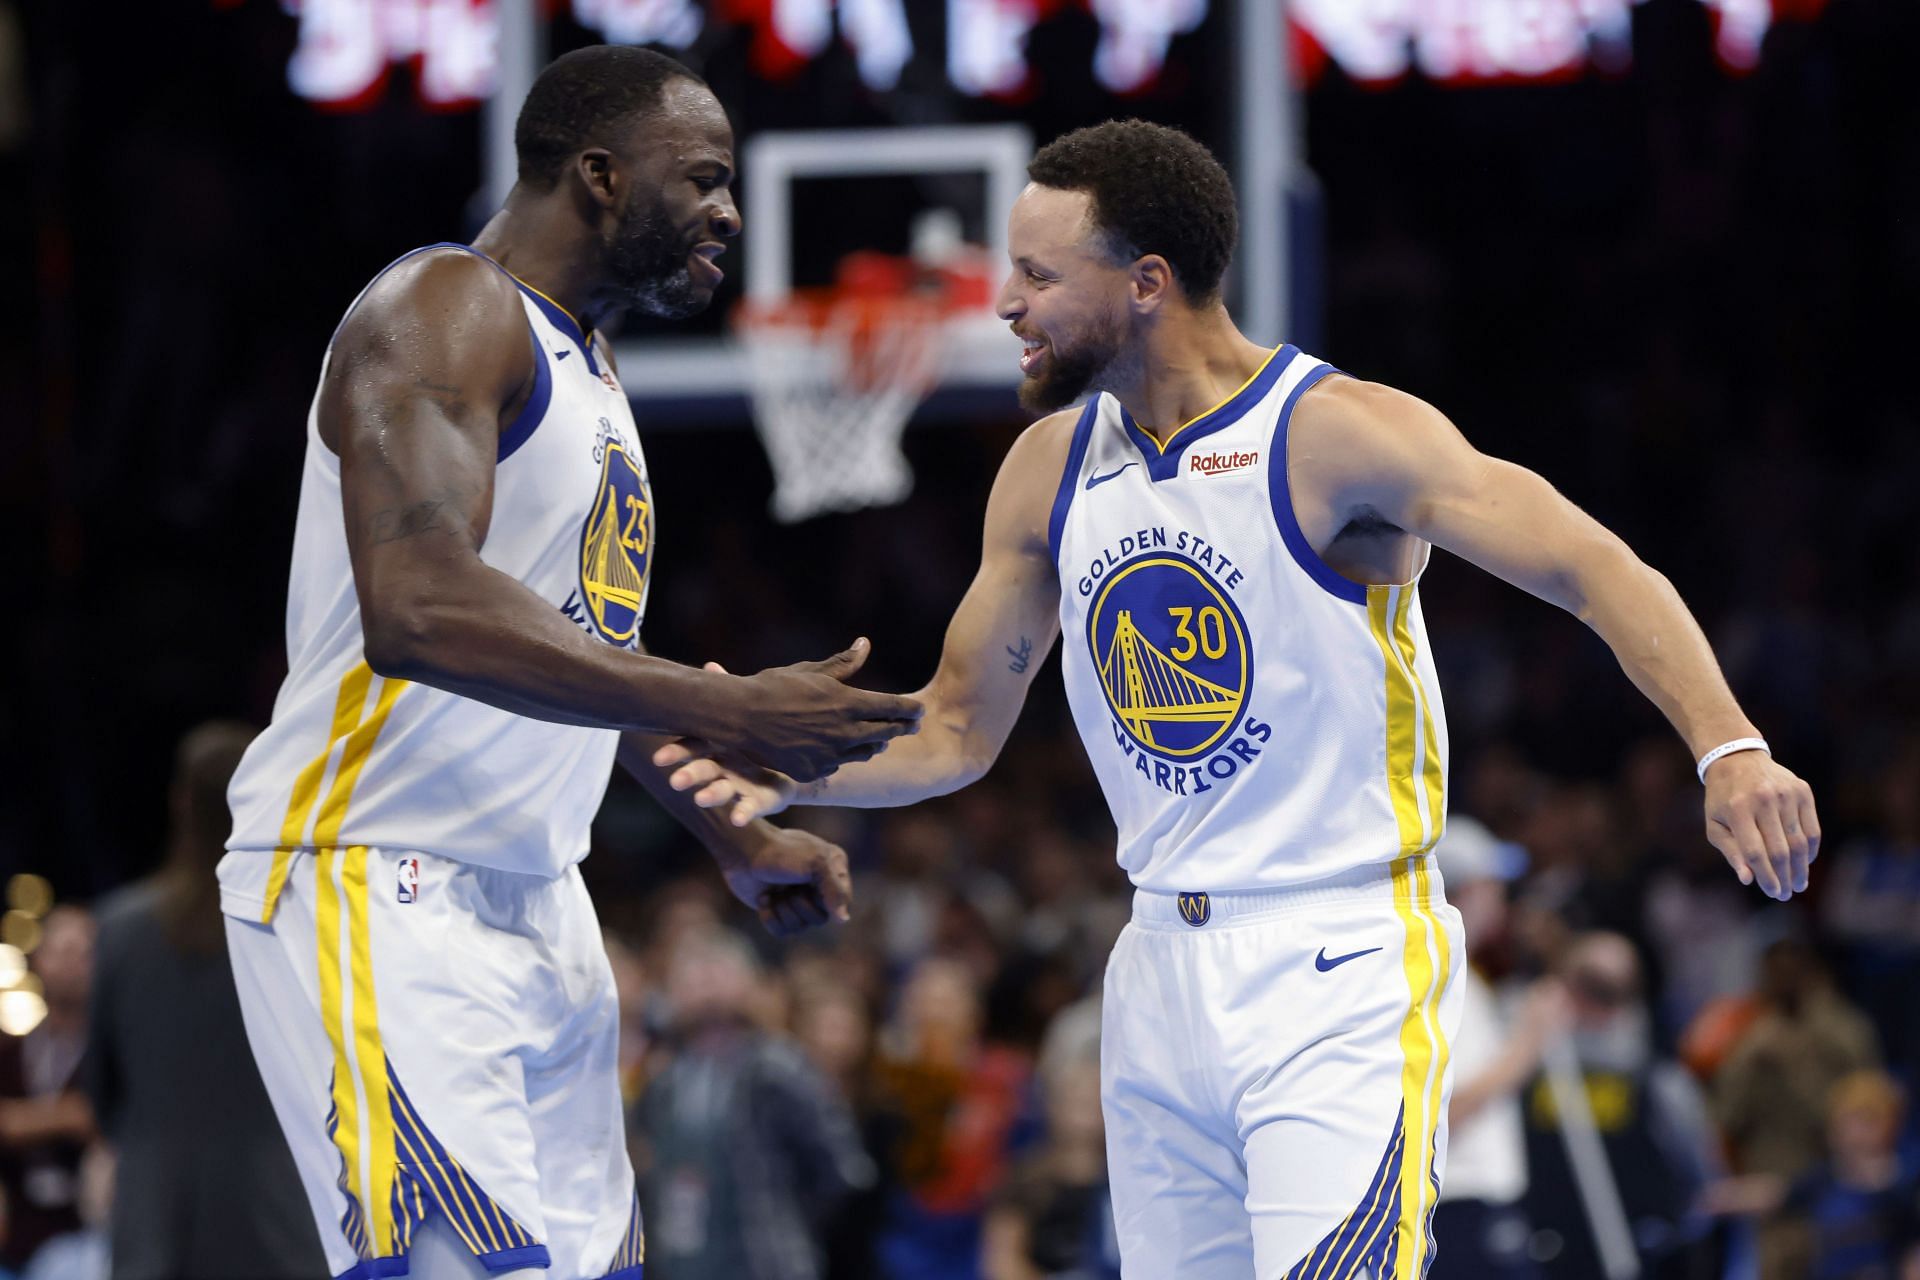 Draymond Green and Steph Curry of the Golden State Warriors